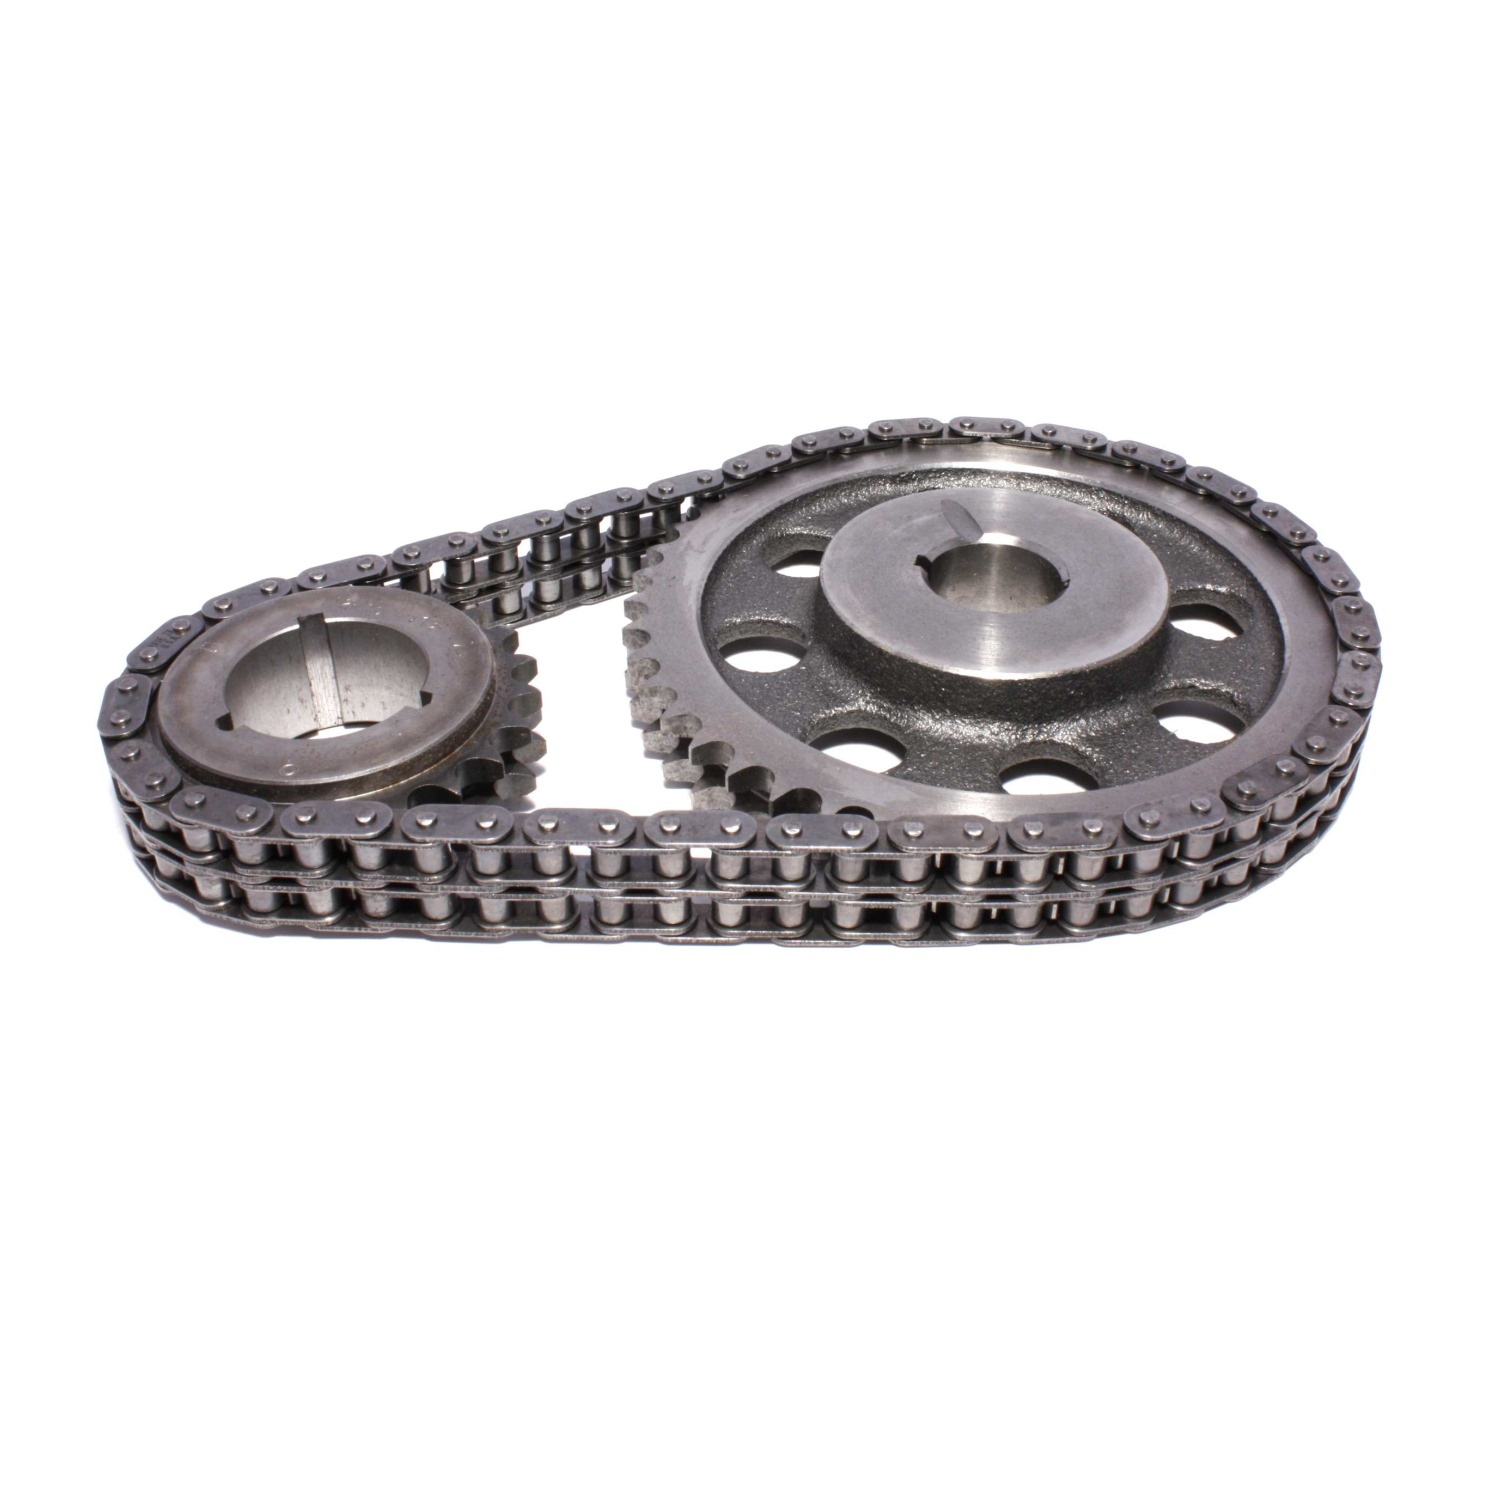 Replacement Timing Chain for 2118 Timing Set. - 2118